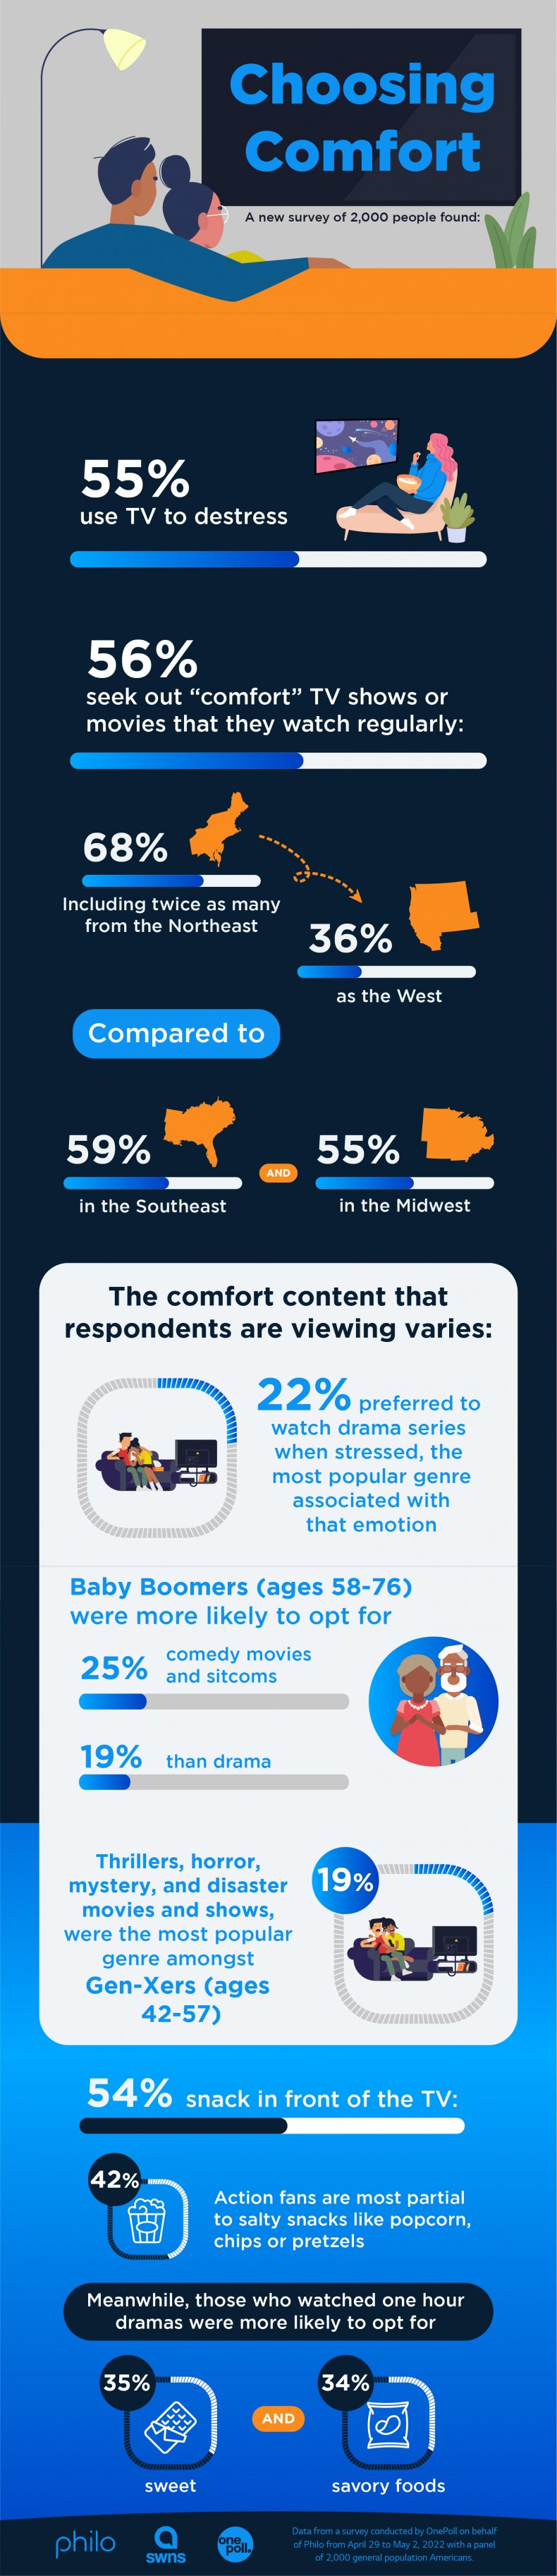 Americans watch TV to relax and destress